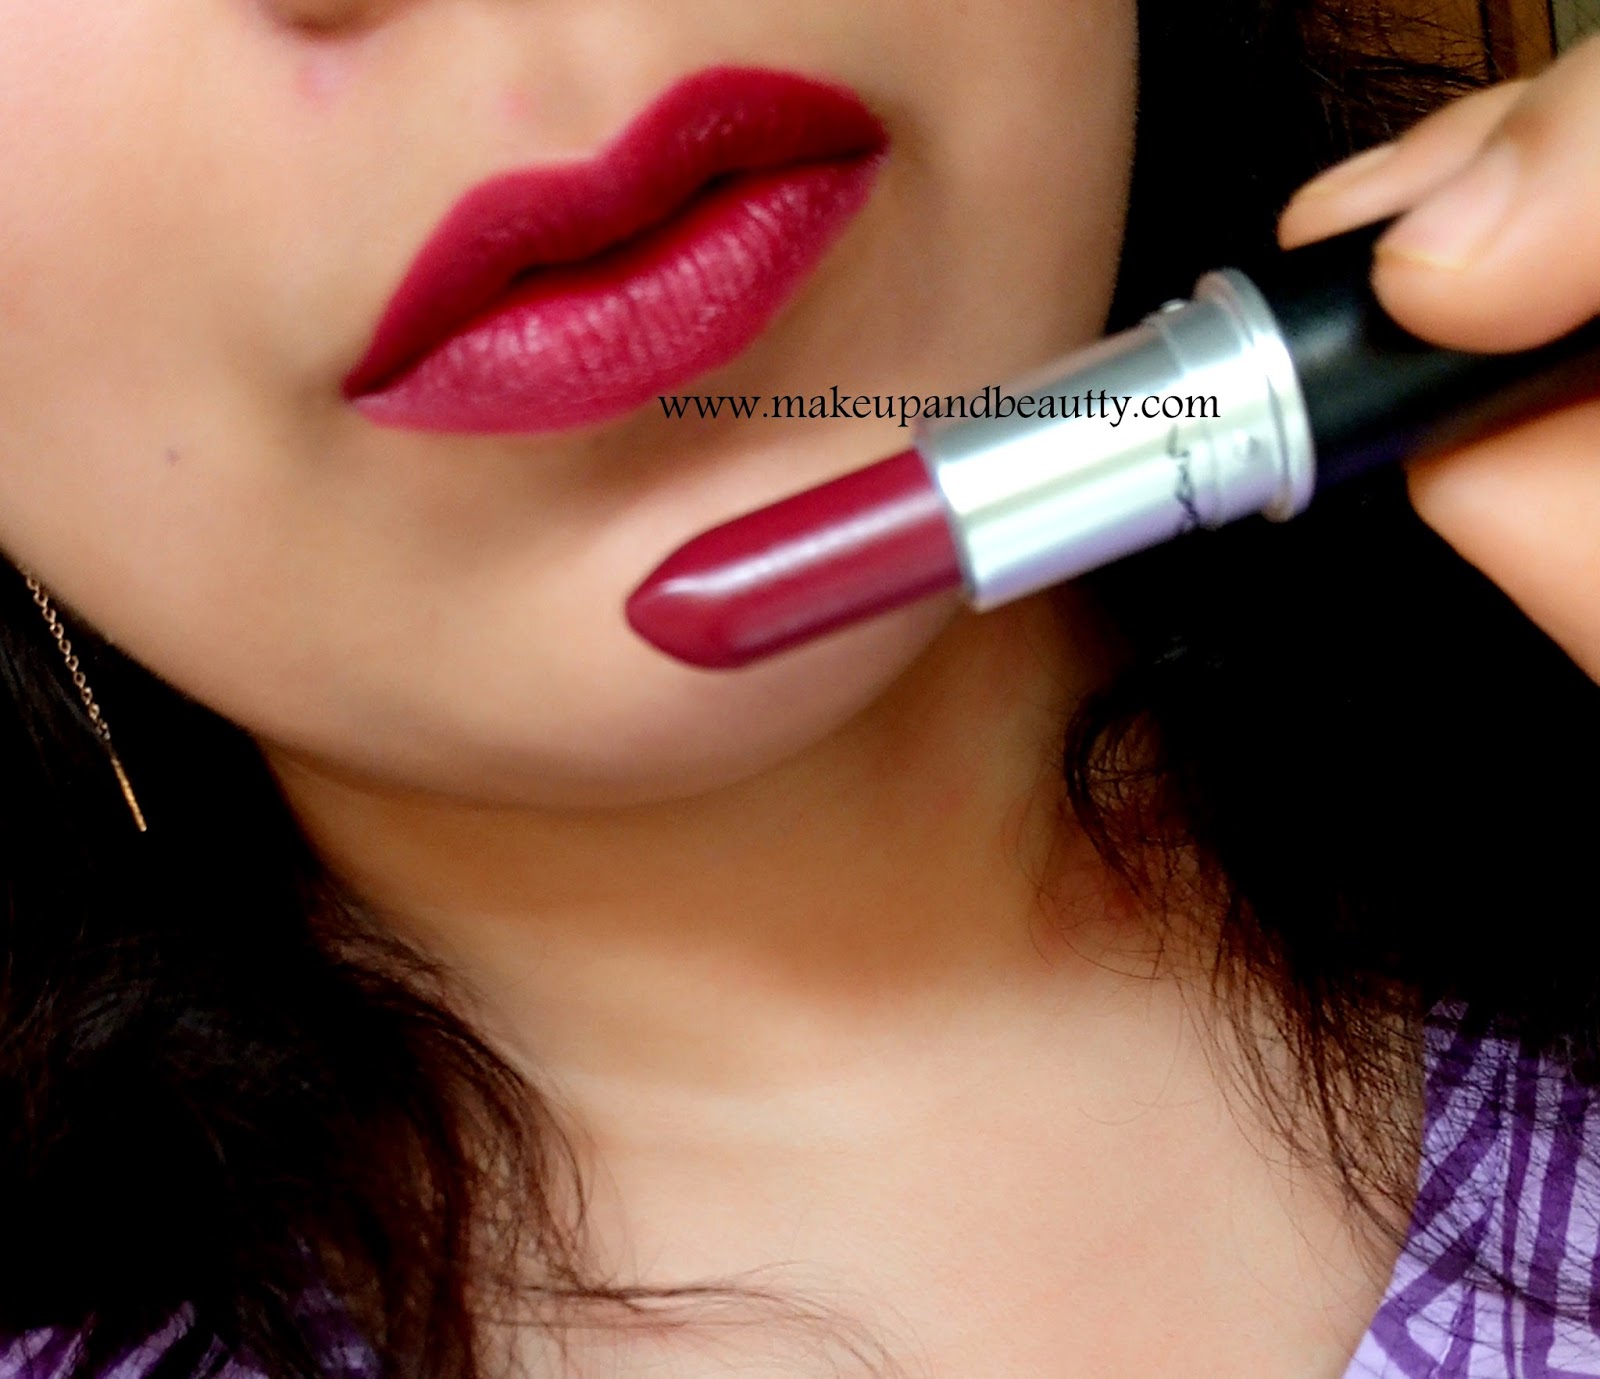 Makeup And Beauty Mac D For Danger Lipstick Ii Review Ii Swatches Ii